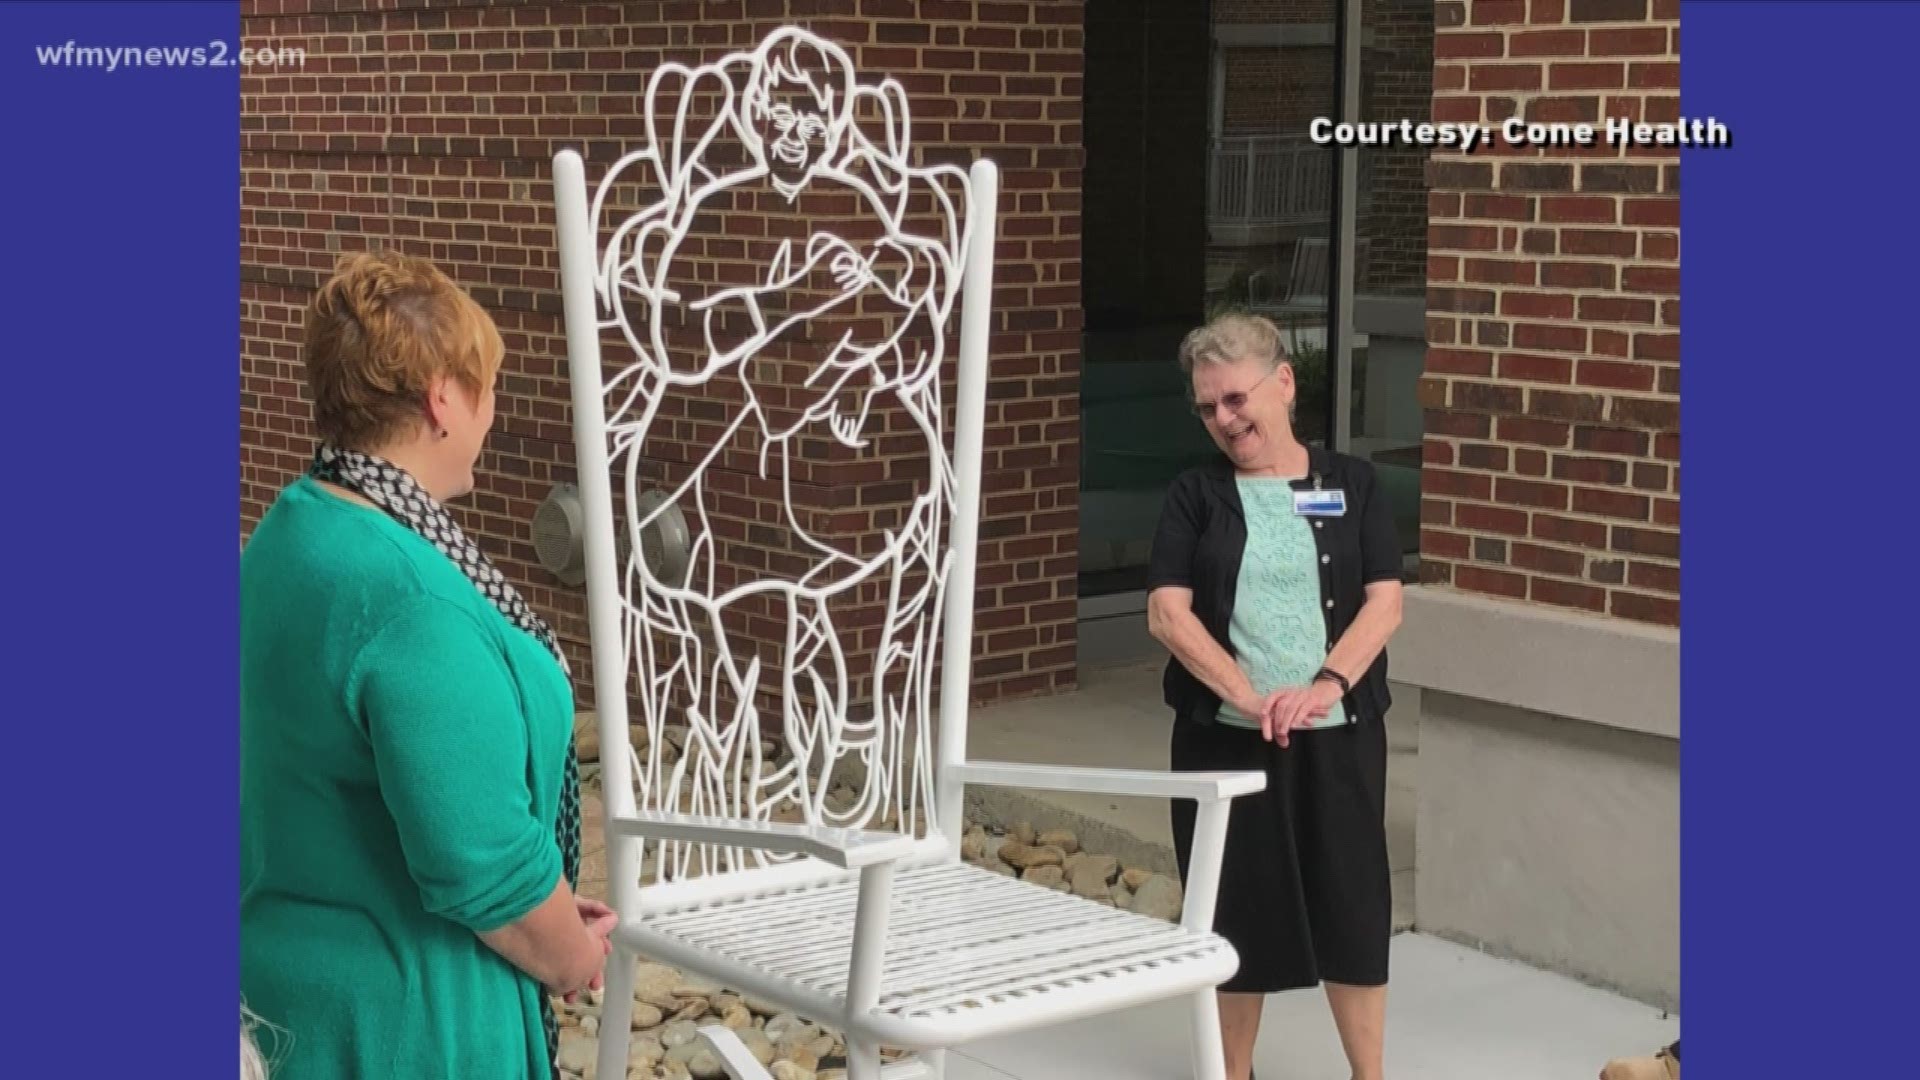 Sarah Bean was honored with a sculpture of a rocking chair because of her love of rocking babies over her 23 year career. The hospital says she rocked half of the babies in Greensboro.